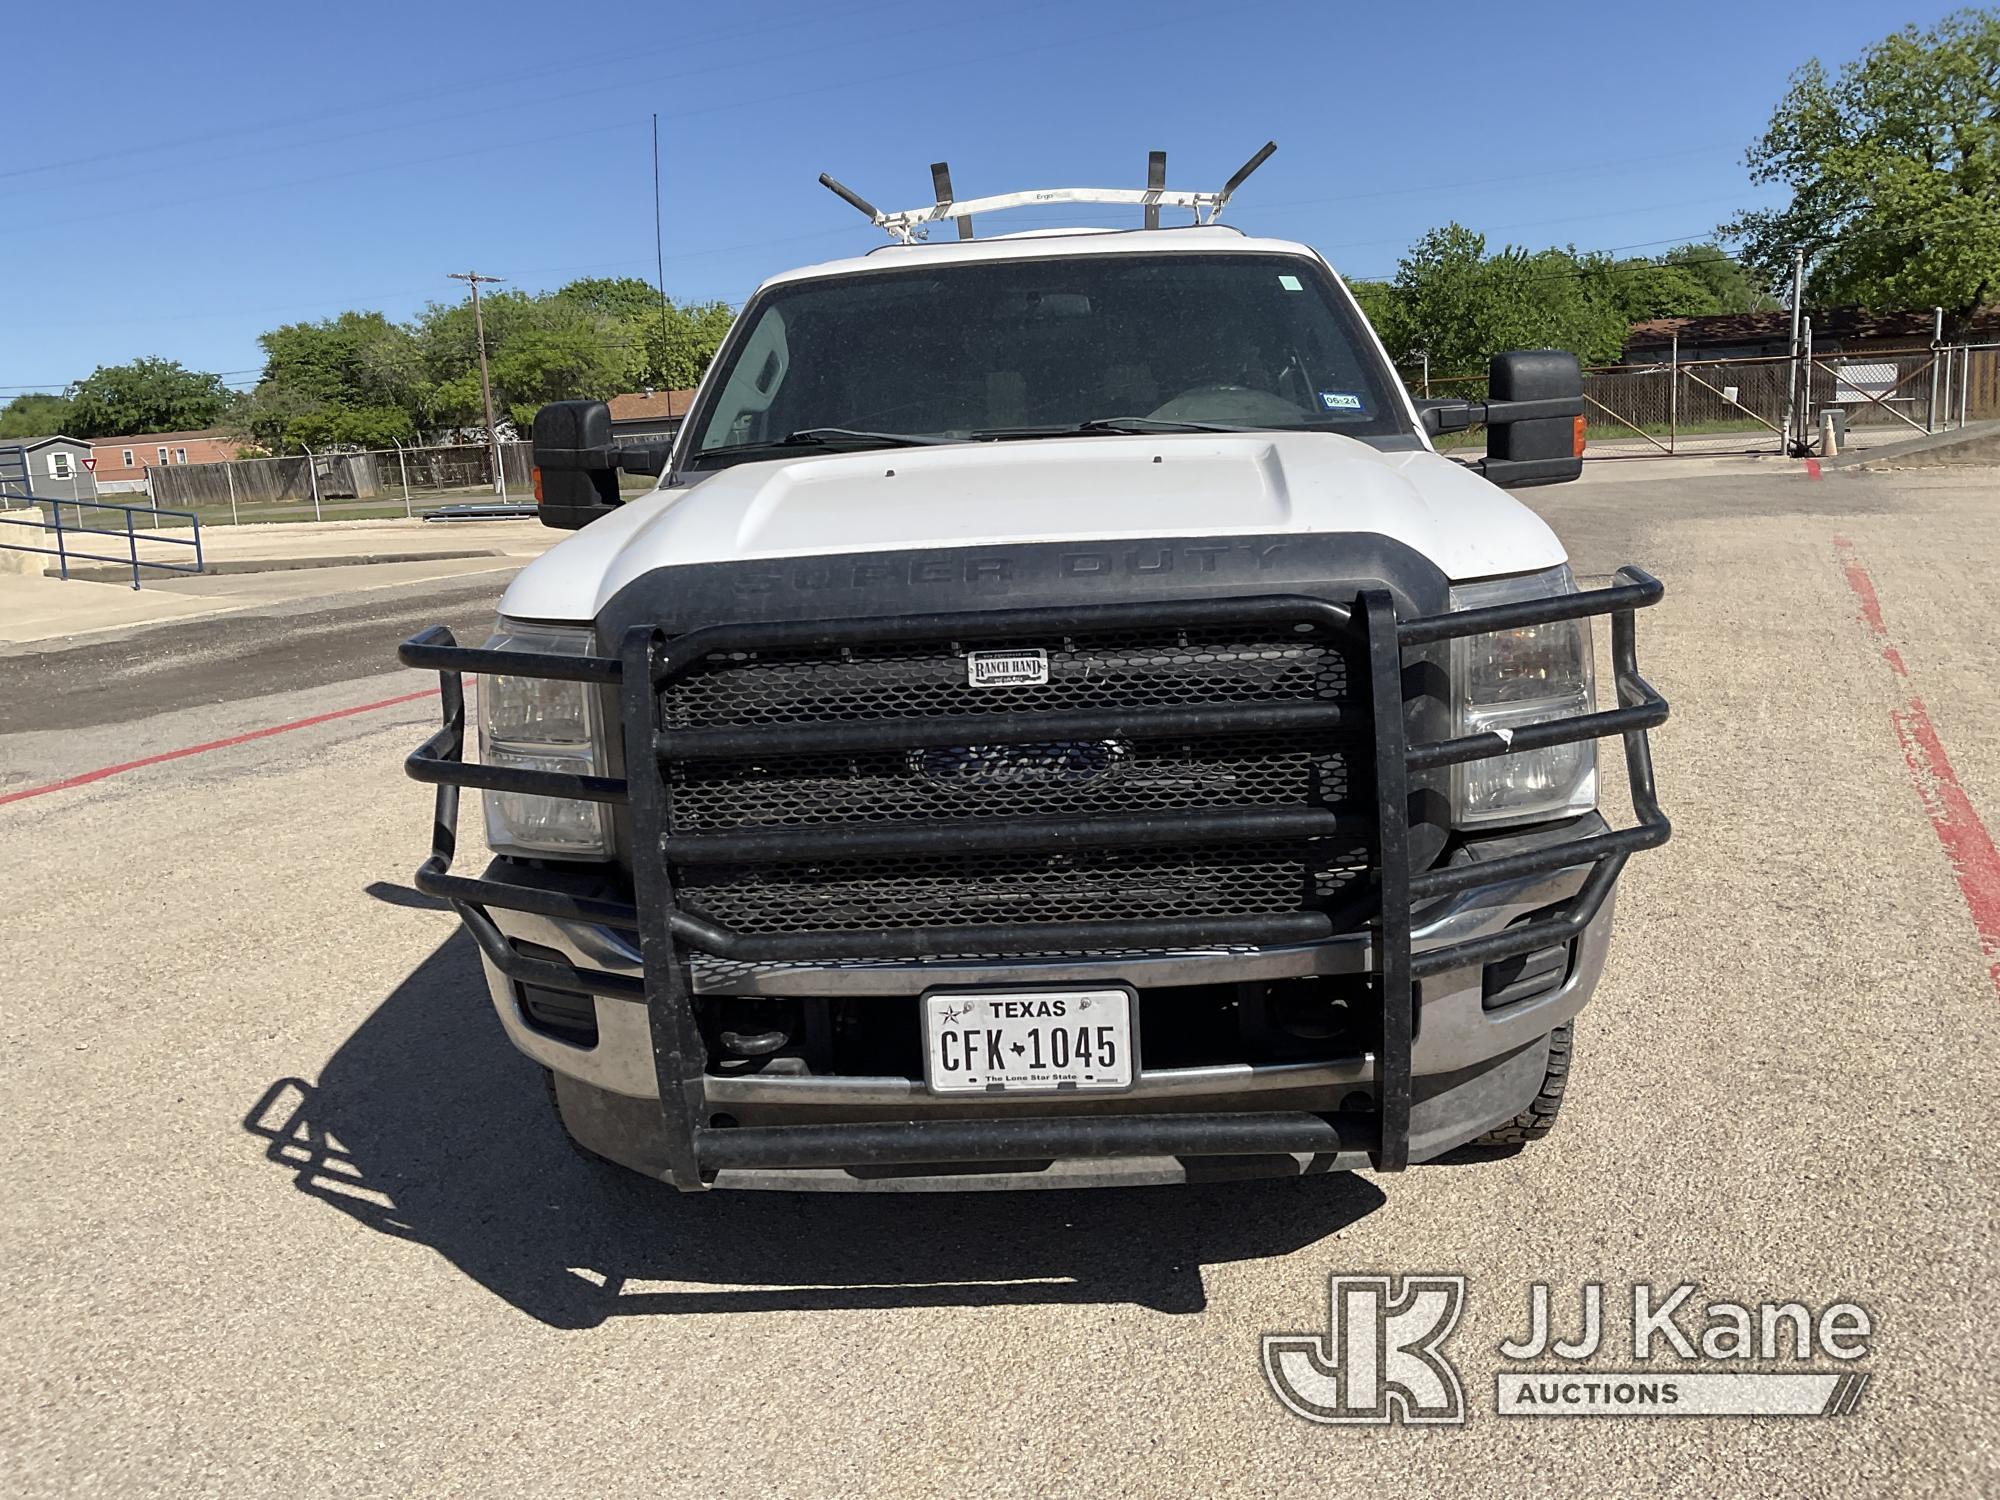 (Hondo, TX) 2013 Ford F250 4x4 Extended-Cab Pickup Truck Runs & Moves) (Check Engine Light Is On